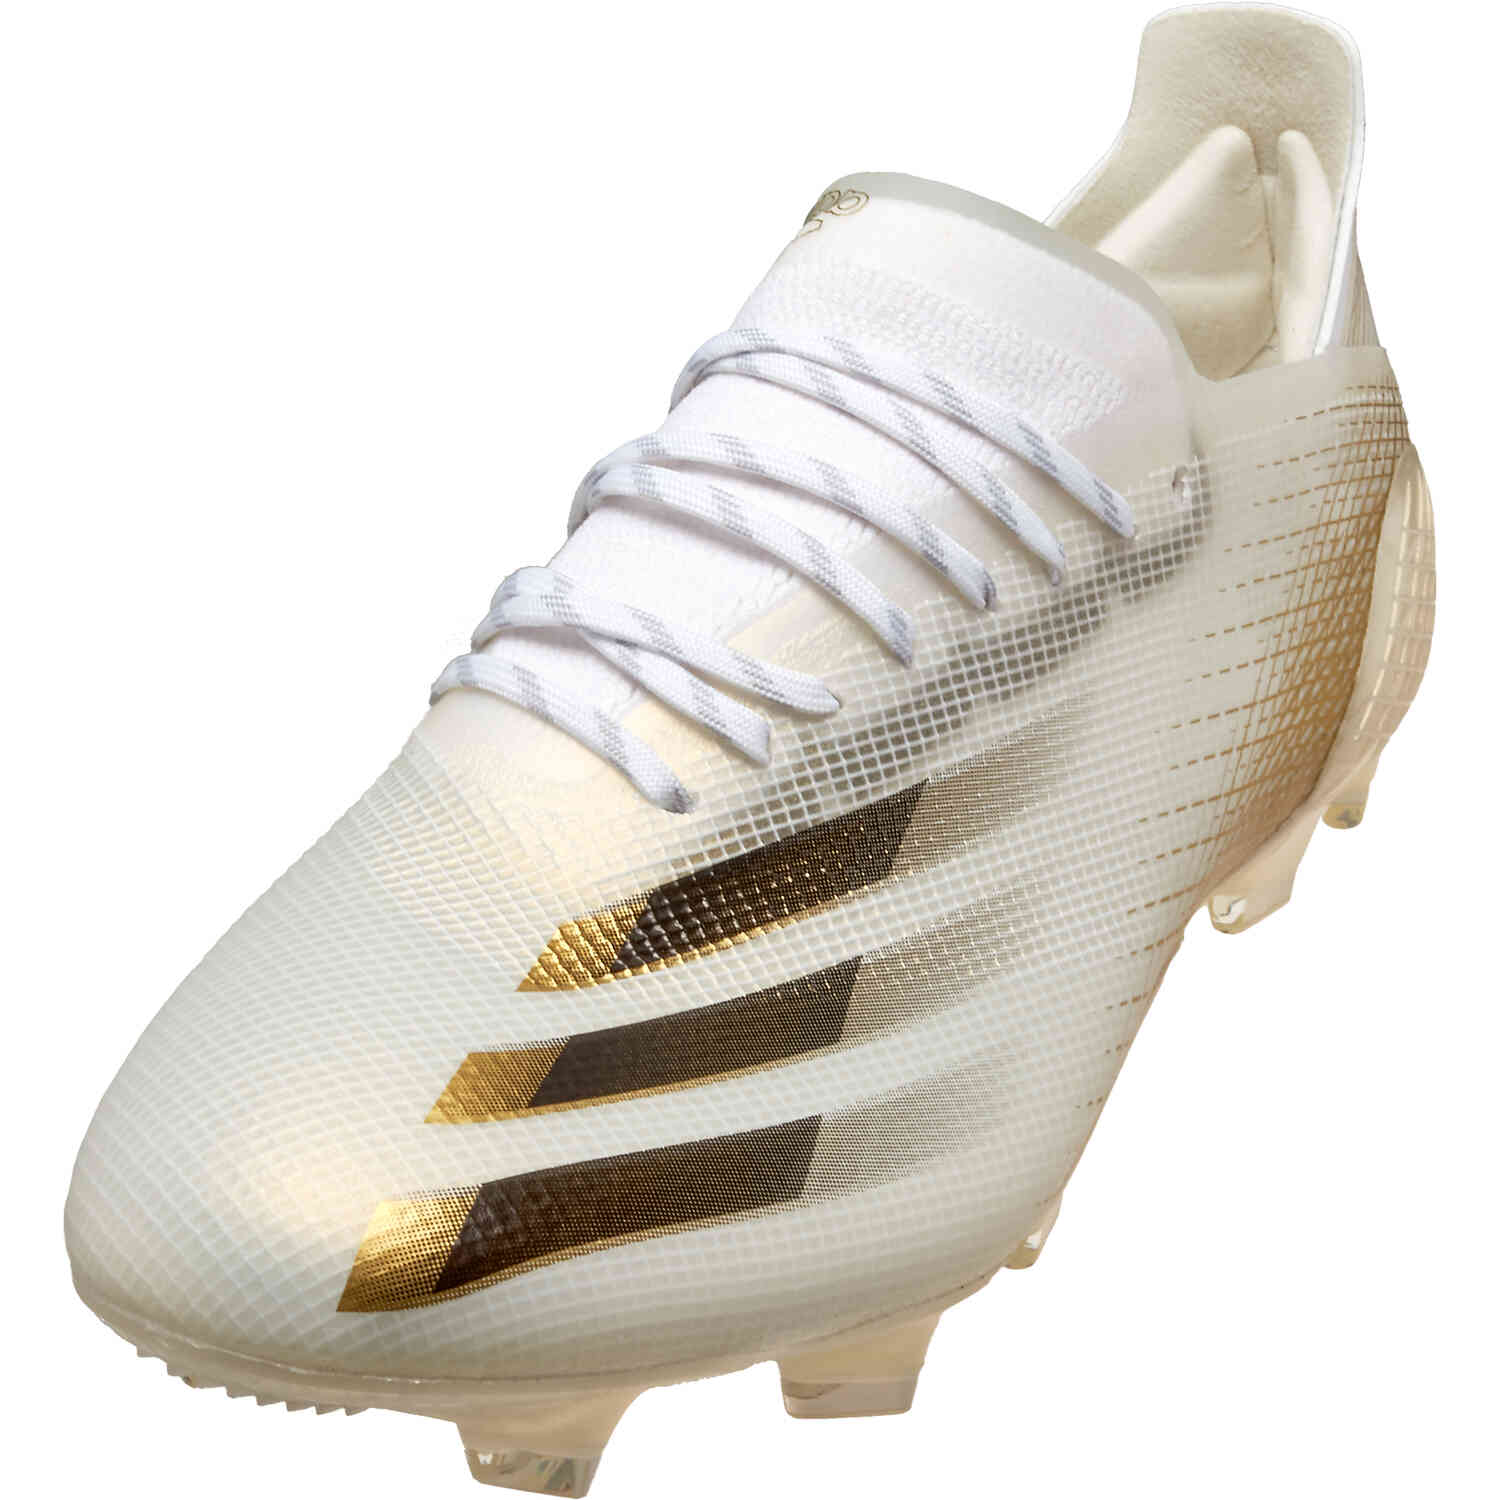 adidas X Ghosted.1 FG - InFlight - SoccerPro